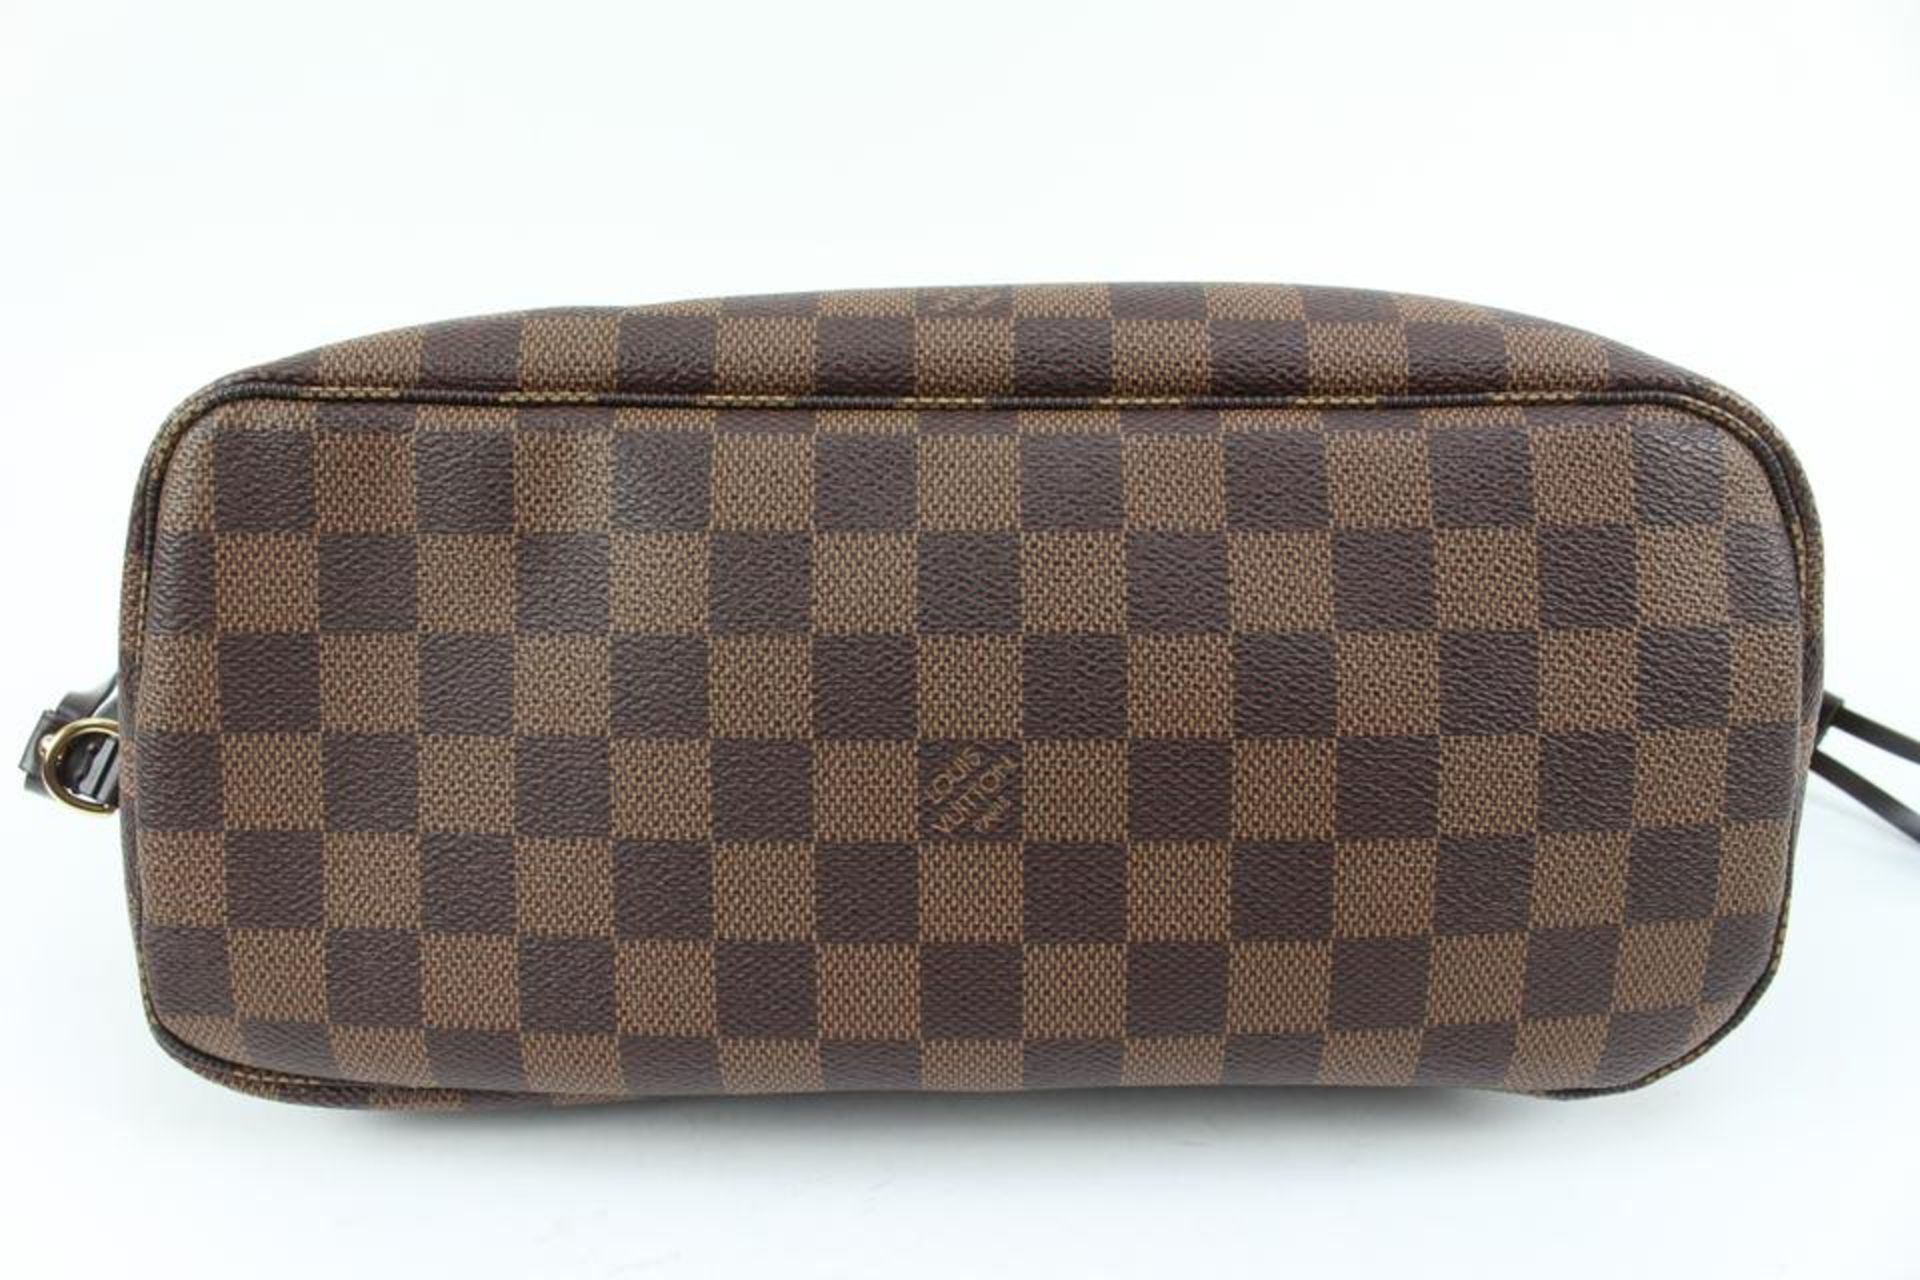 LOUIS VUITTON SMALL DAMIER EBENE NEVEFULL PM TOTE WITH POUCH - Image 7 of 12